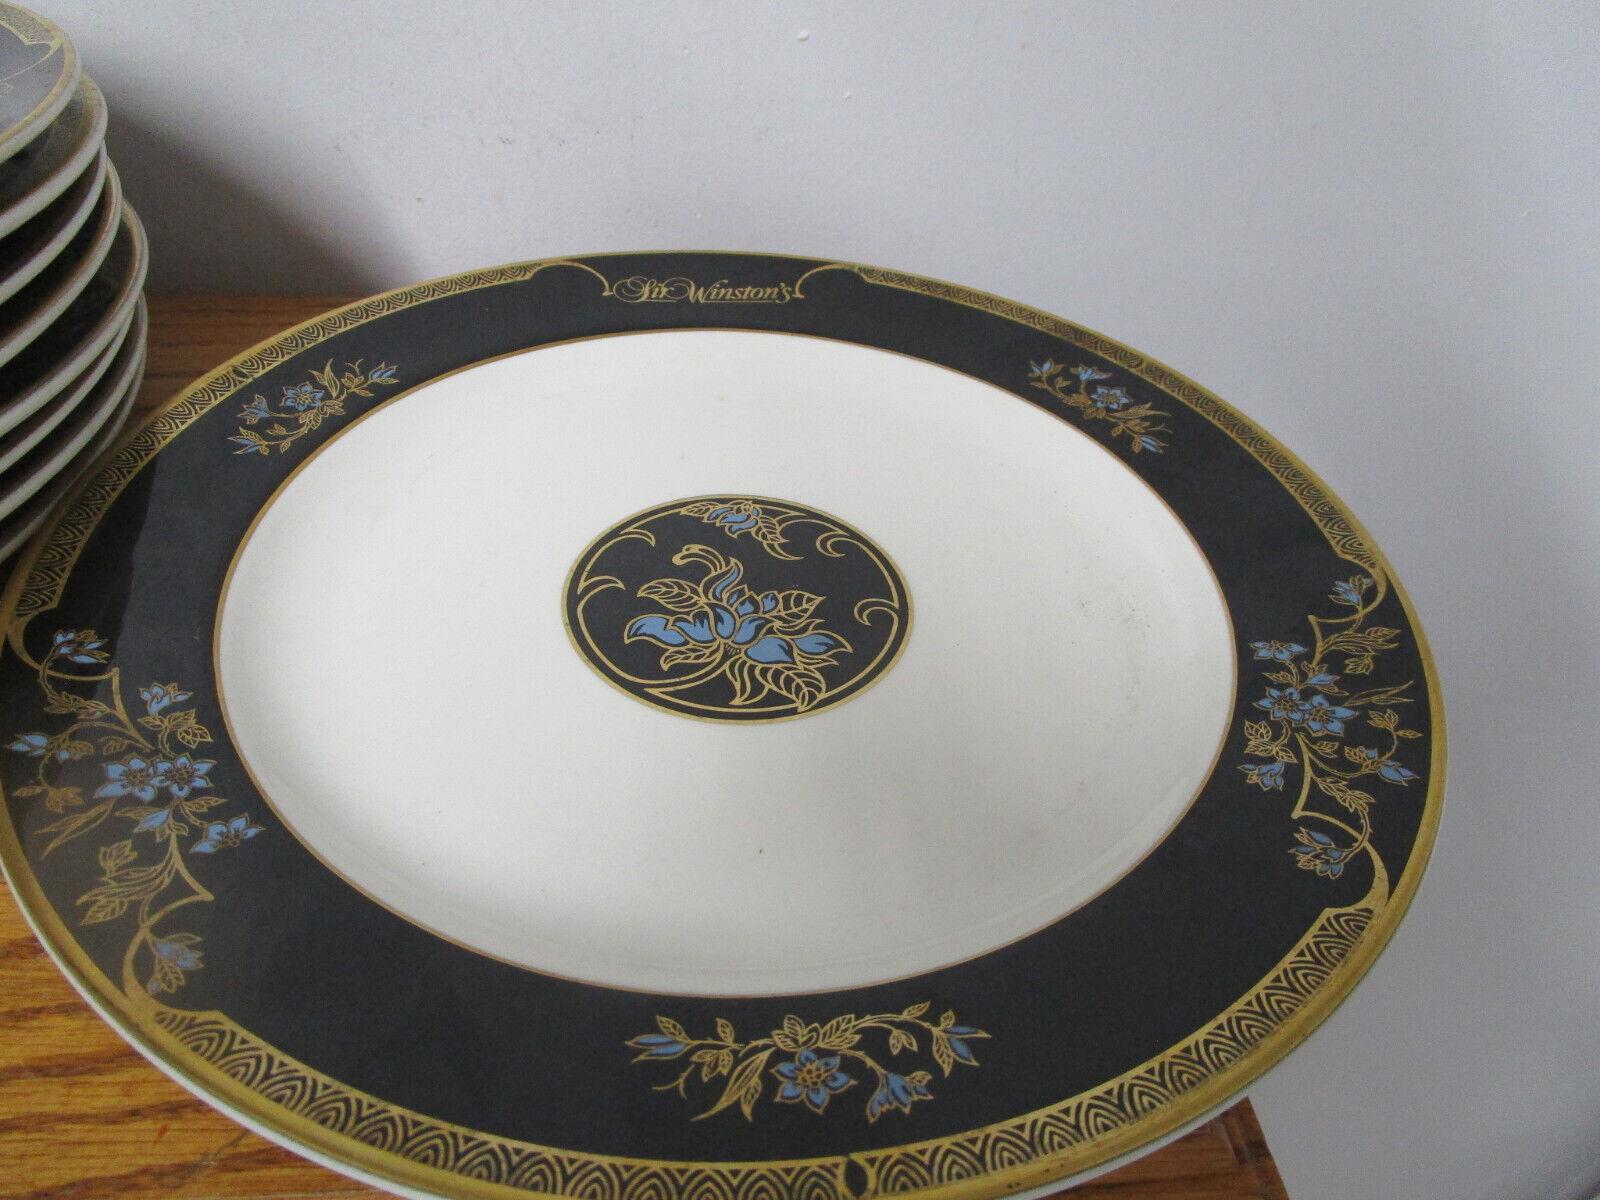 Vintage Sir Winston's Queen Mary Hotel Restaurant Dinner Plates with Gold Trim